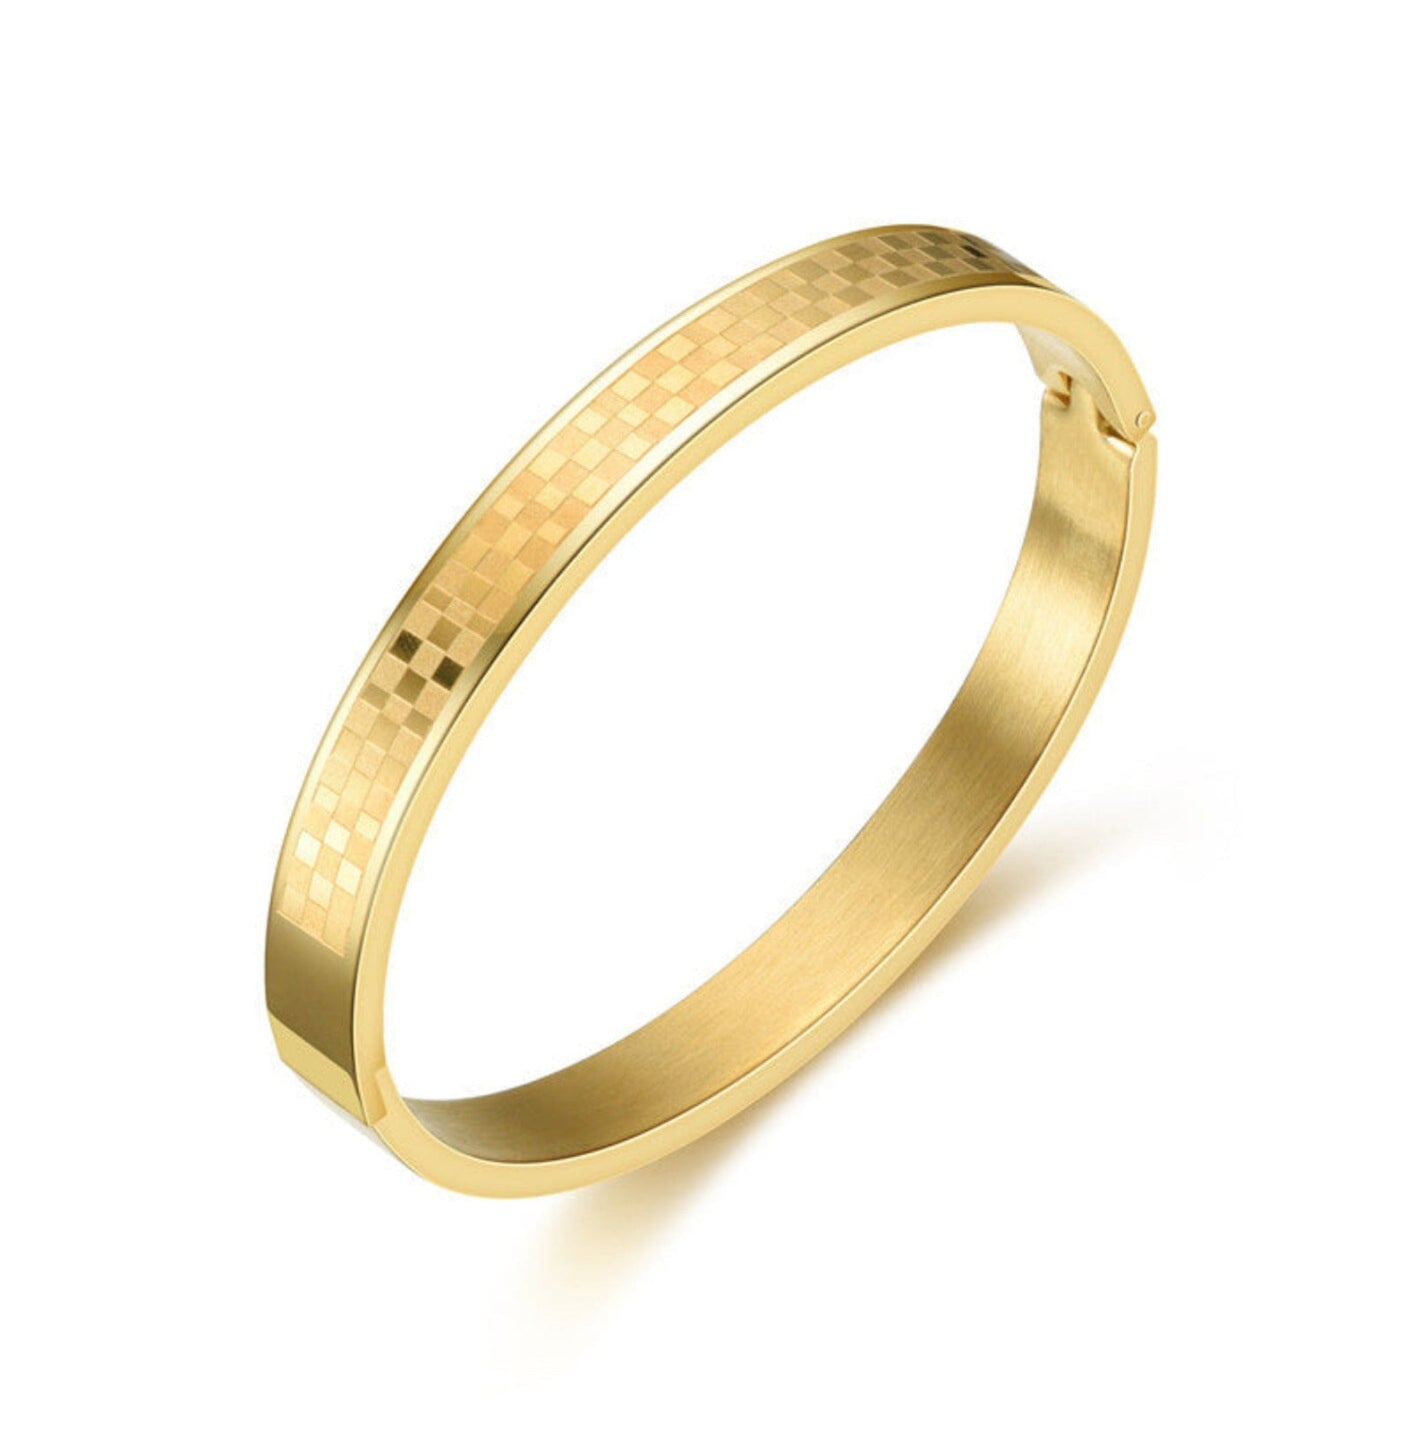 CHECKERED BANGLE - GOLD ring Yubama Jewelry Online Store - The Elegant Designs of Gold and Silver ! Gold 